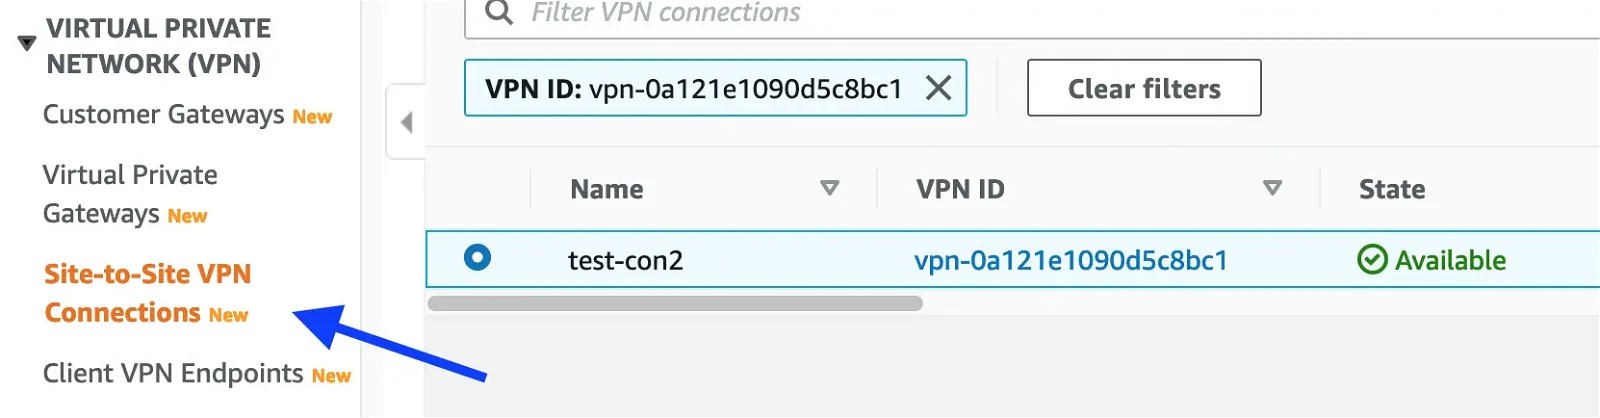 Setup site-to-site tunnel with AWS Virtual Private Gateway navigate to site-to-site VPN connection